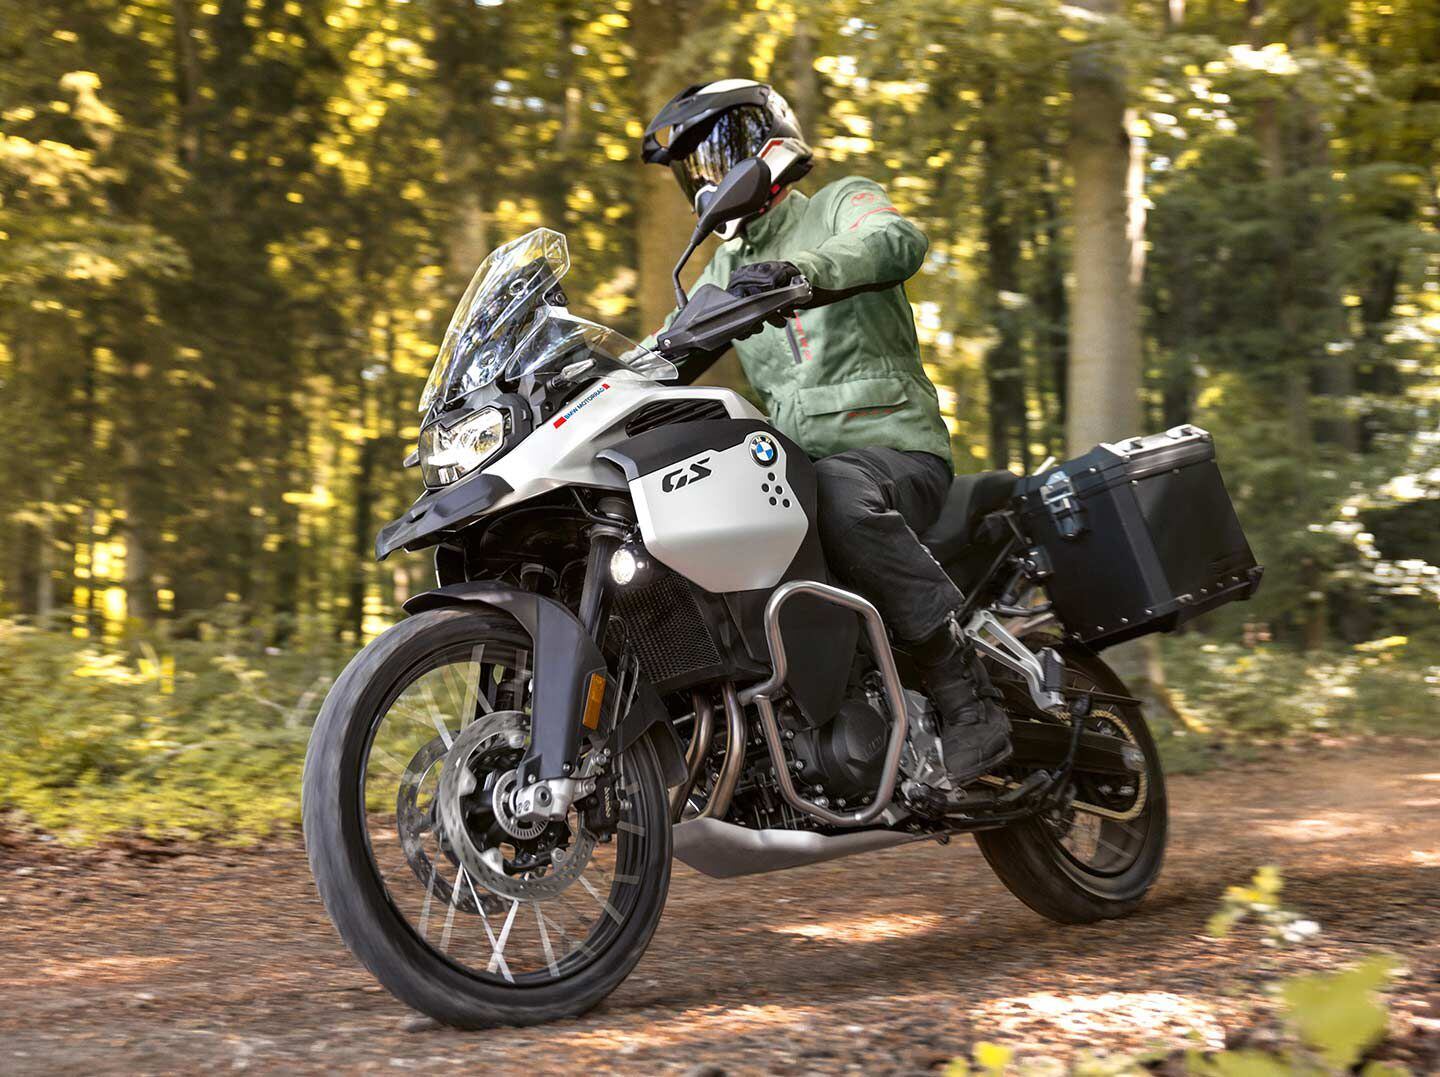 The taller, heavier F 900 GS Adventure also gets LED headlights and new side panels, and has heated grips and an aluminum engine guard as standard.